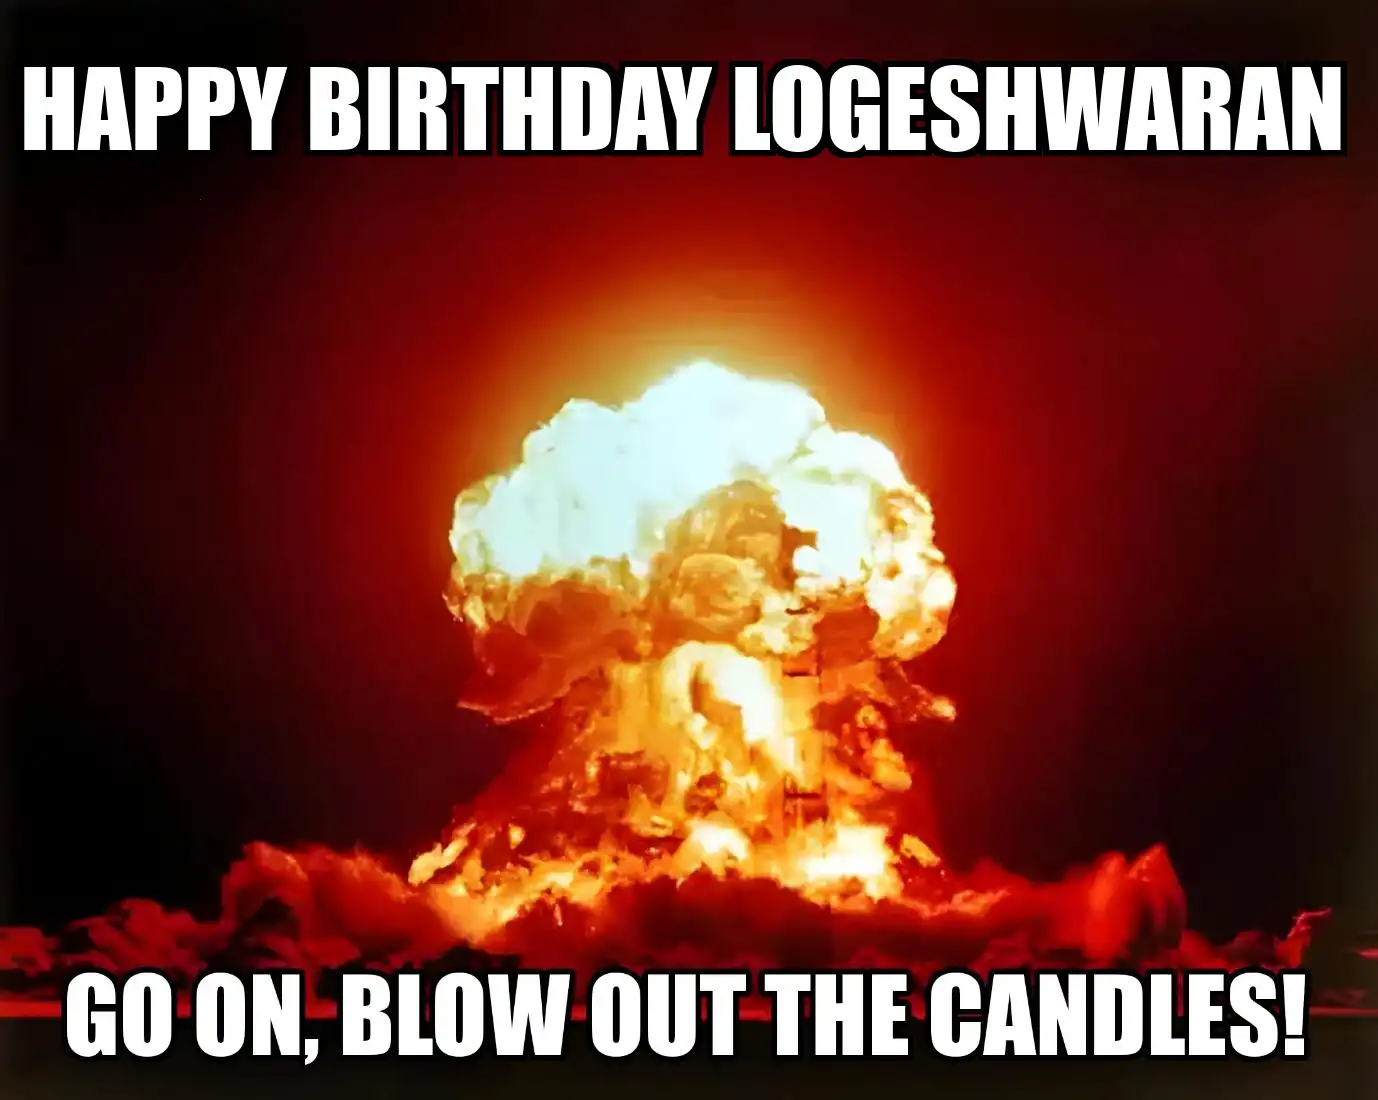 Happy Birthday Logeshwaran Go On Blow Out The Candles Meme